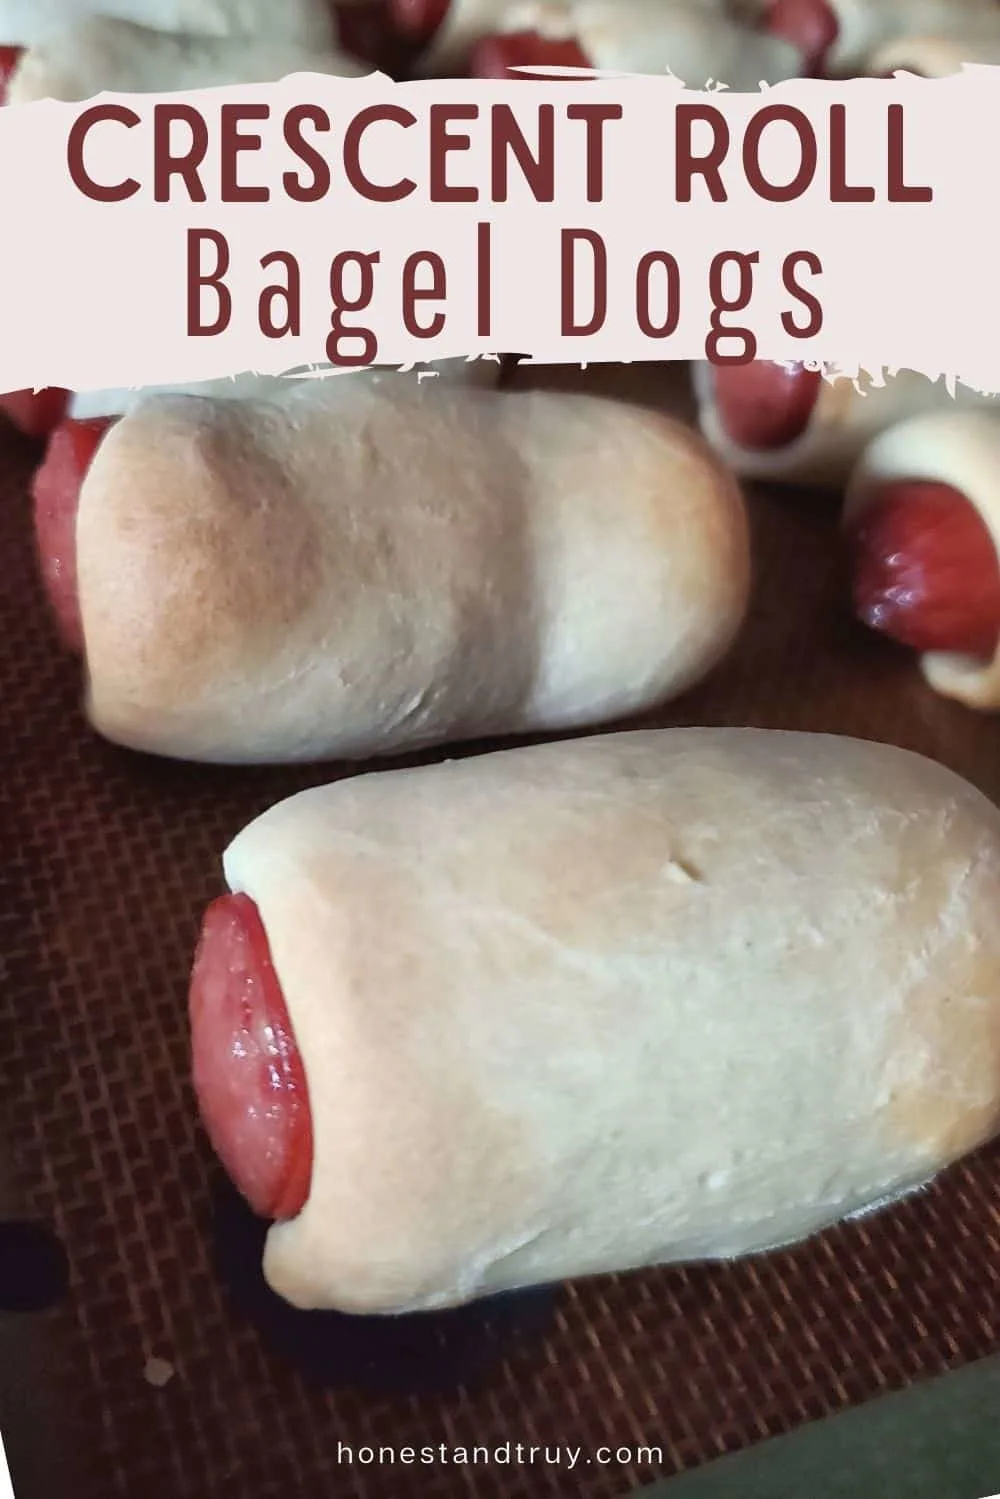 Crescent roll dogs close up on a diagonal sitting on a silpat with text of crescent roll bagel dogs.